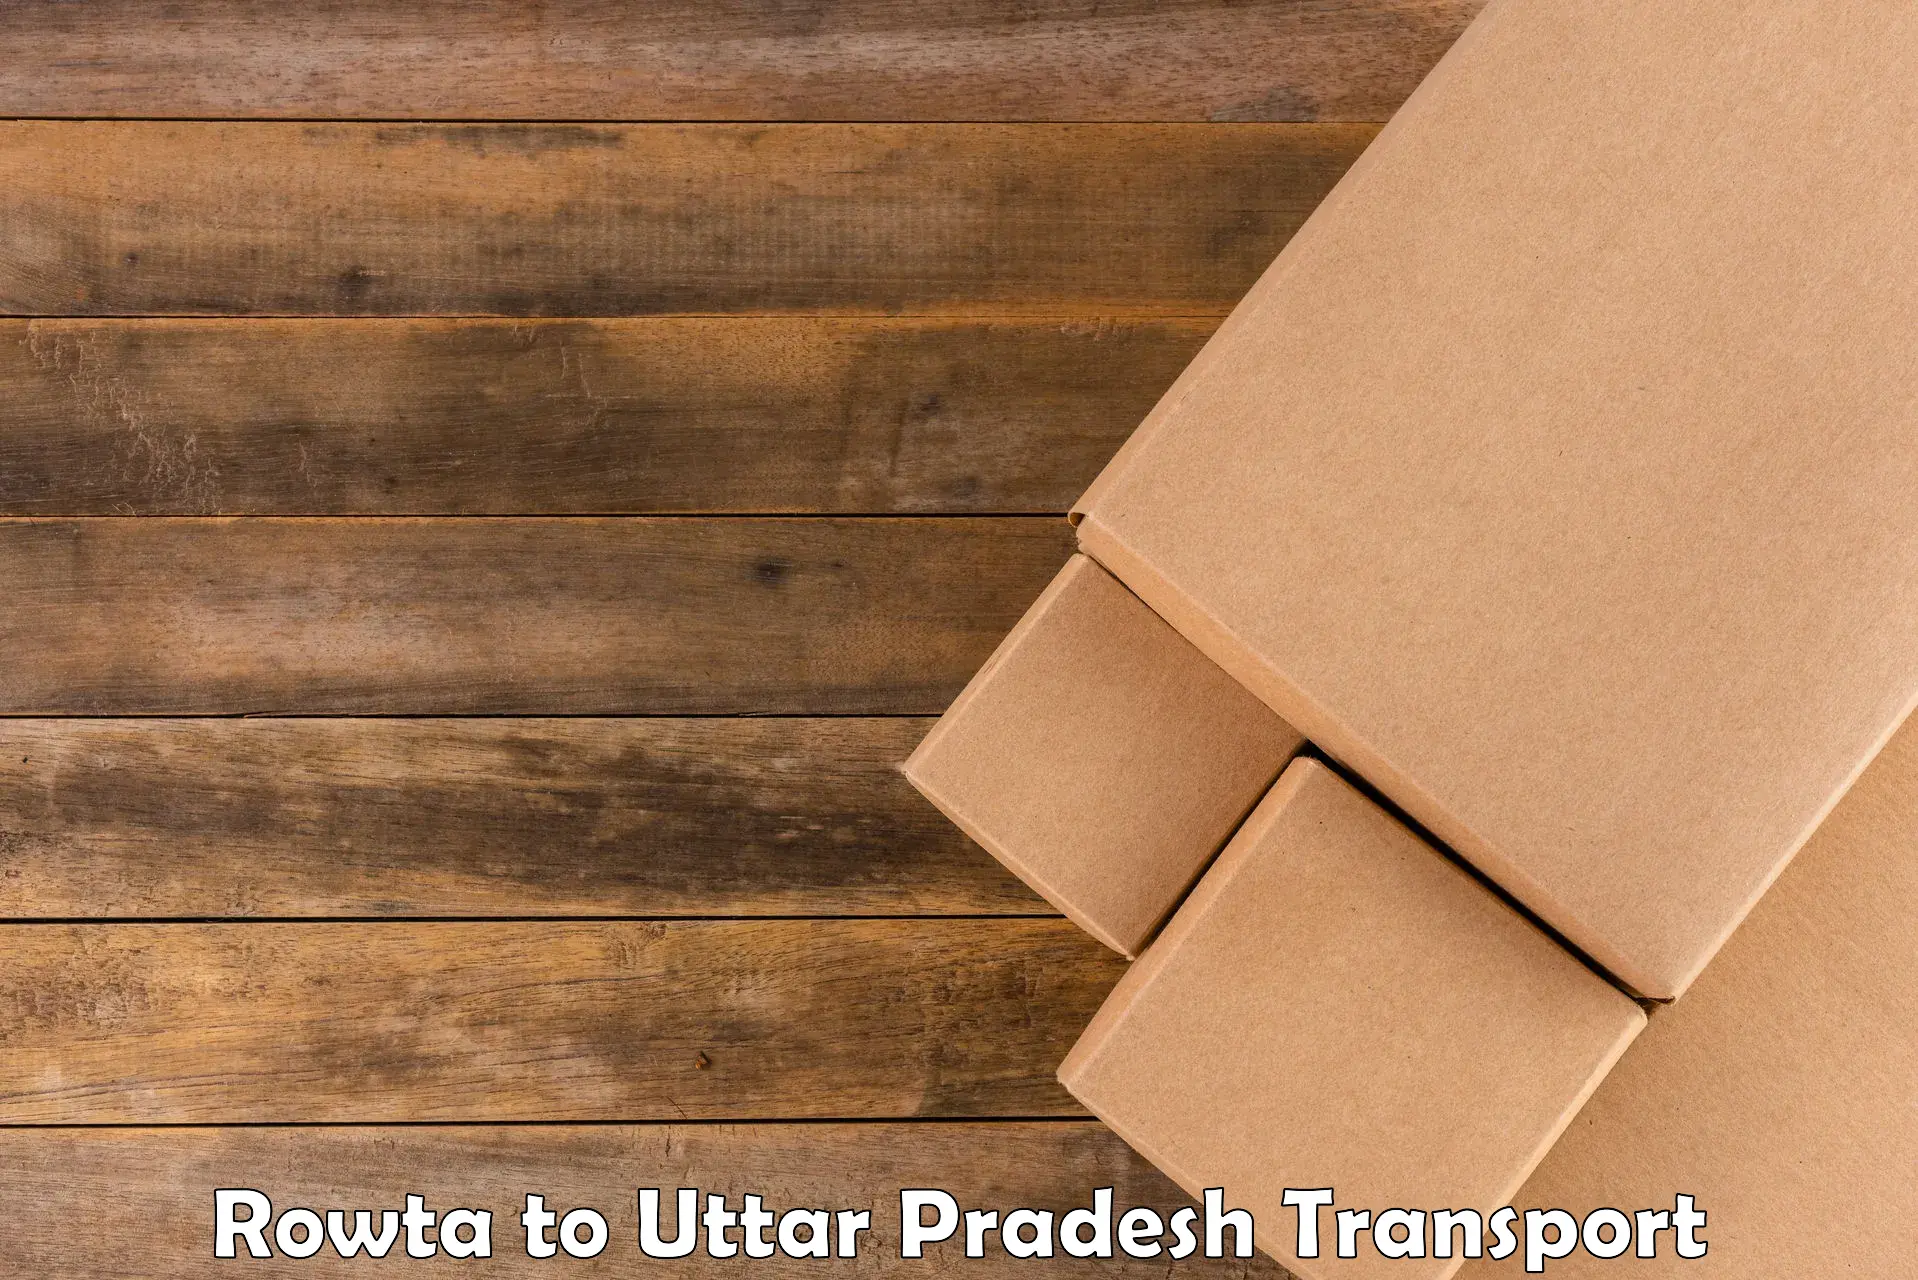 Nationwide transport services Rowta to Fatehabad Agra